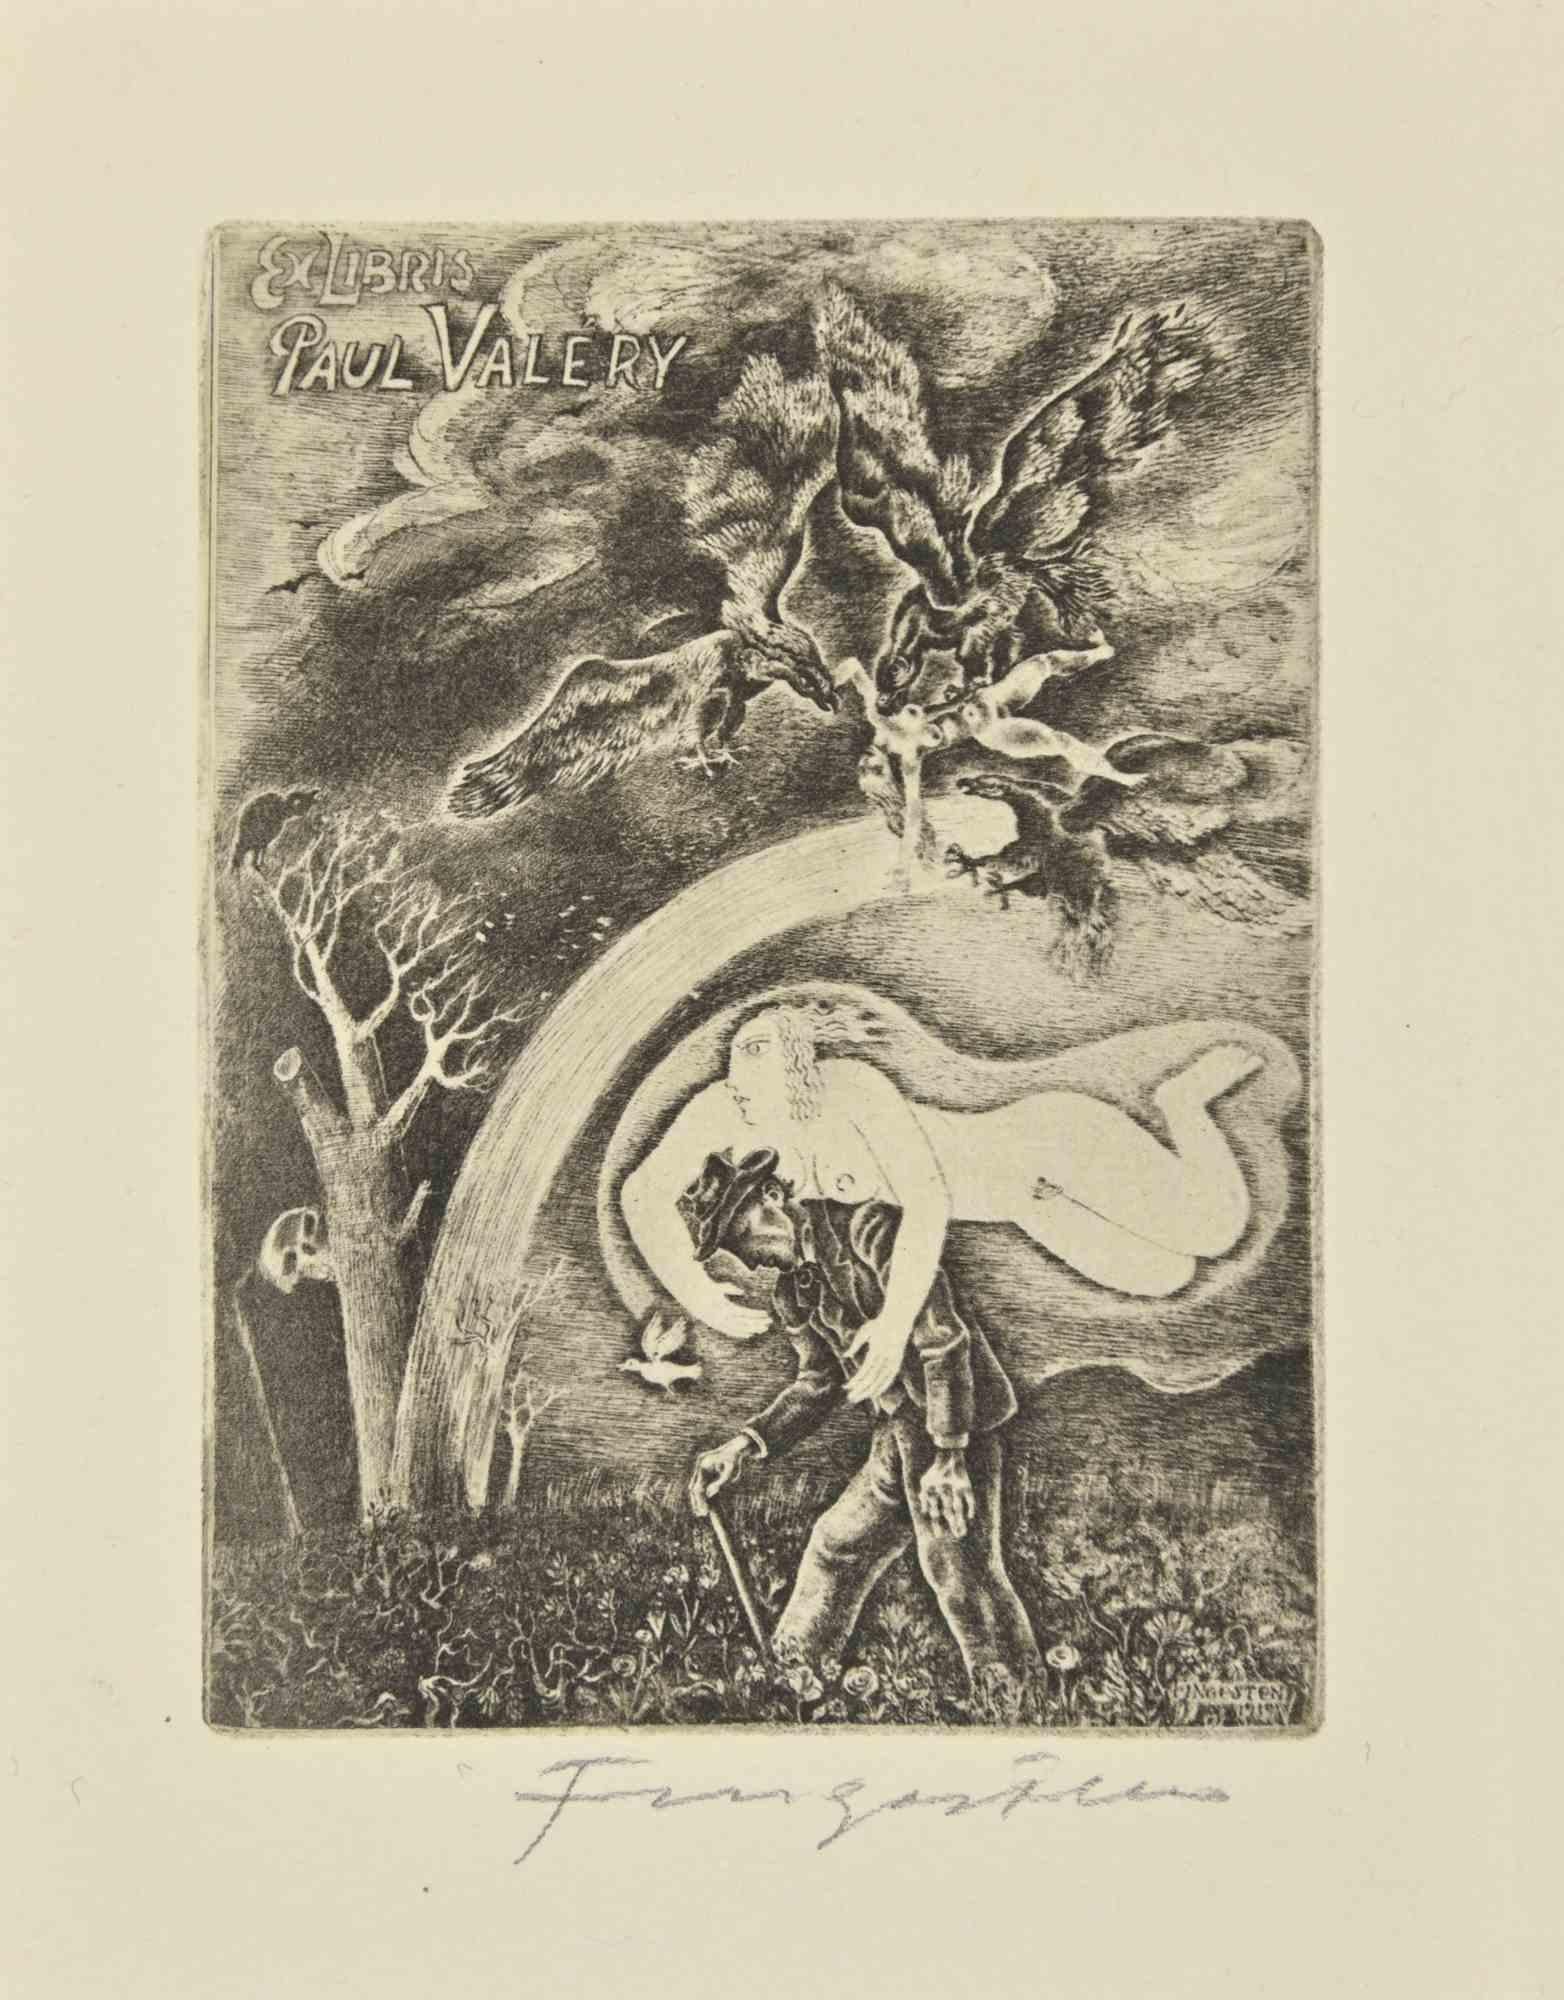 Ex Libris - Paul Valery is an Etching print realized by Michel Fingesten.

Hand Signed in the lower right margin.

Good conditions.

Michel Fingesten (1884 - 1943) was a Czech painter and engraver of Jewish origin. He is considered one of the